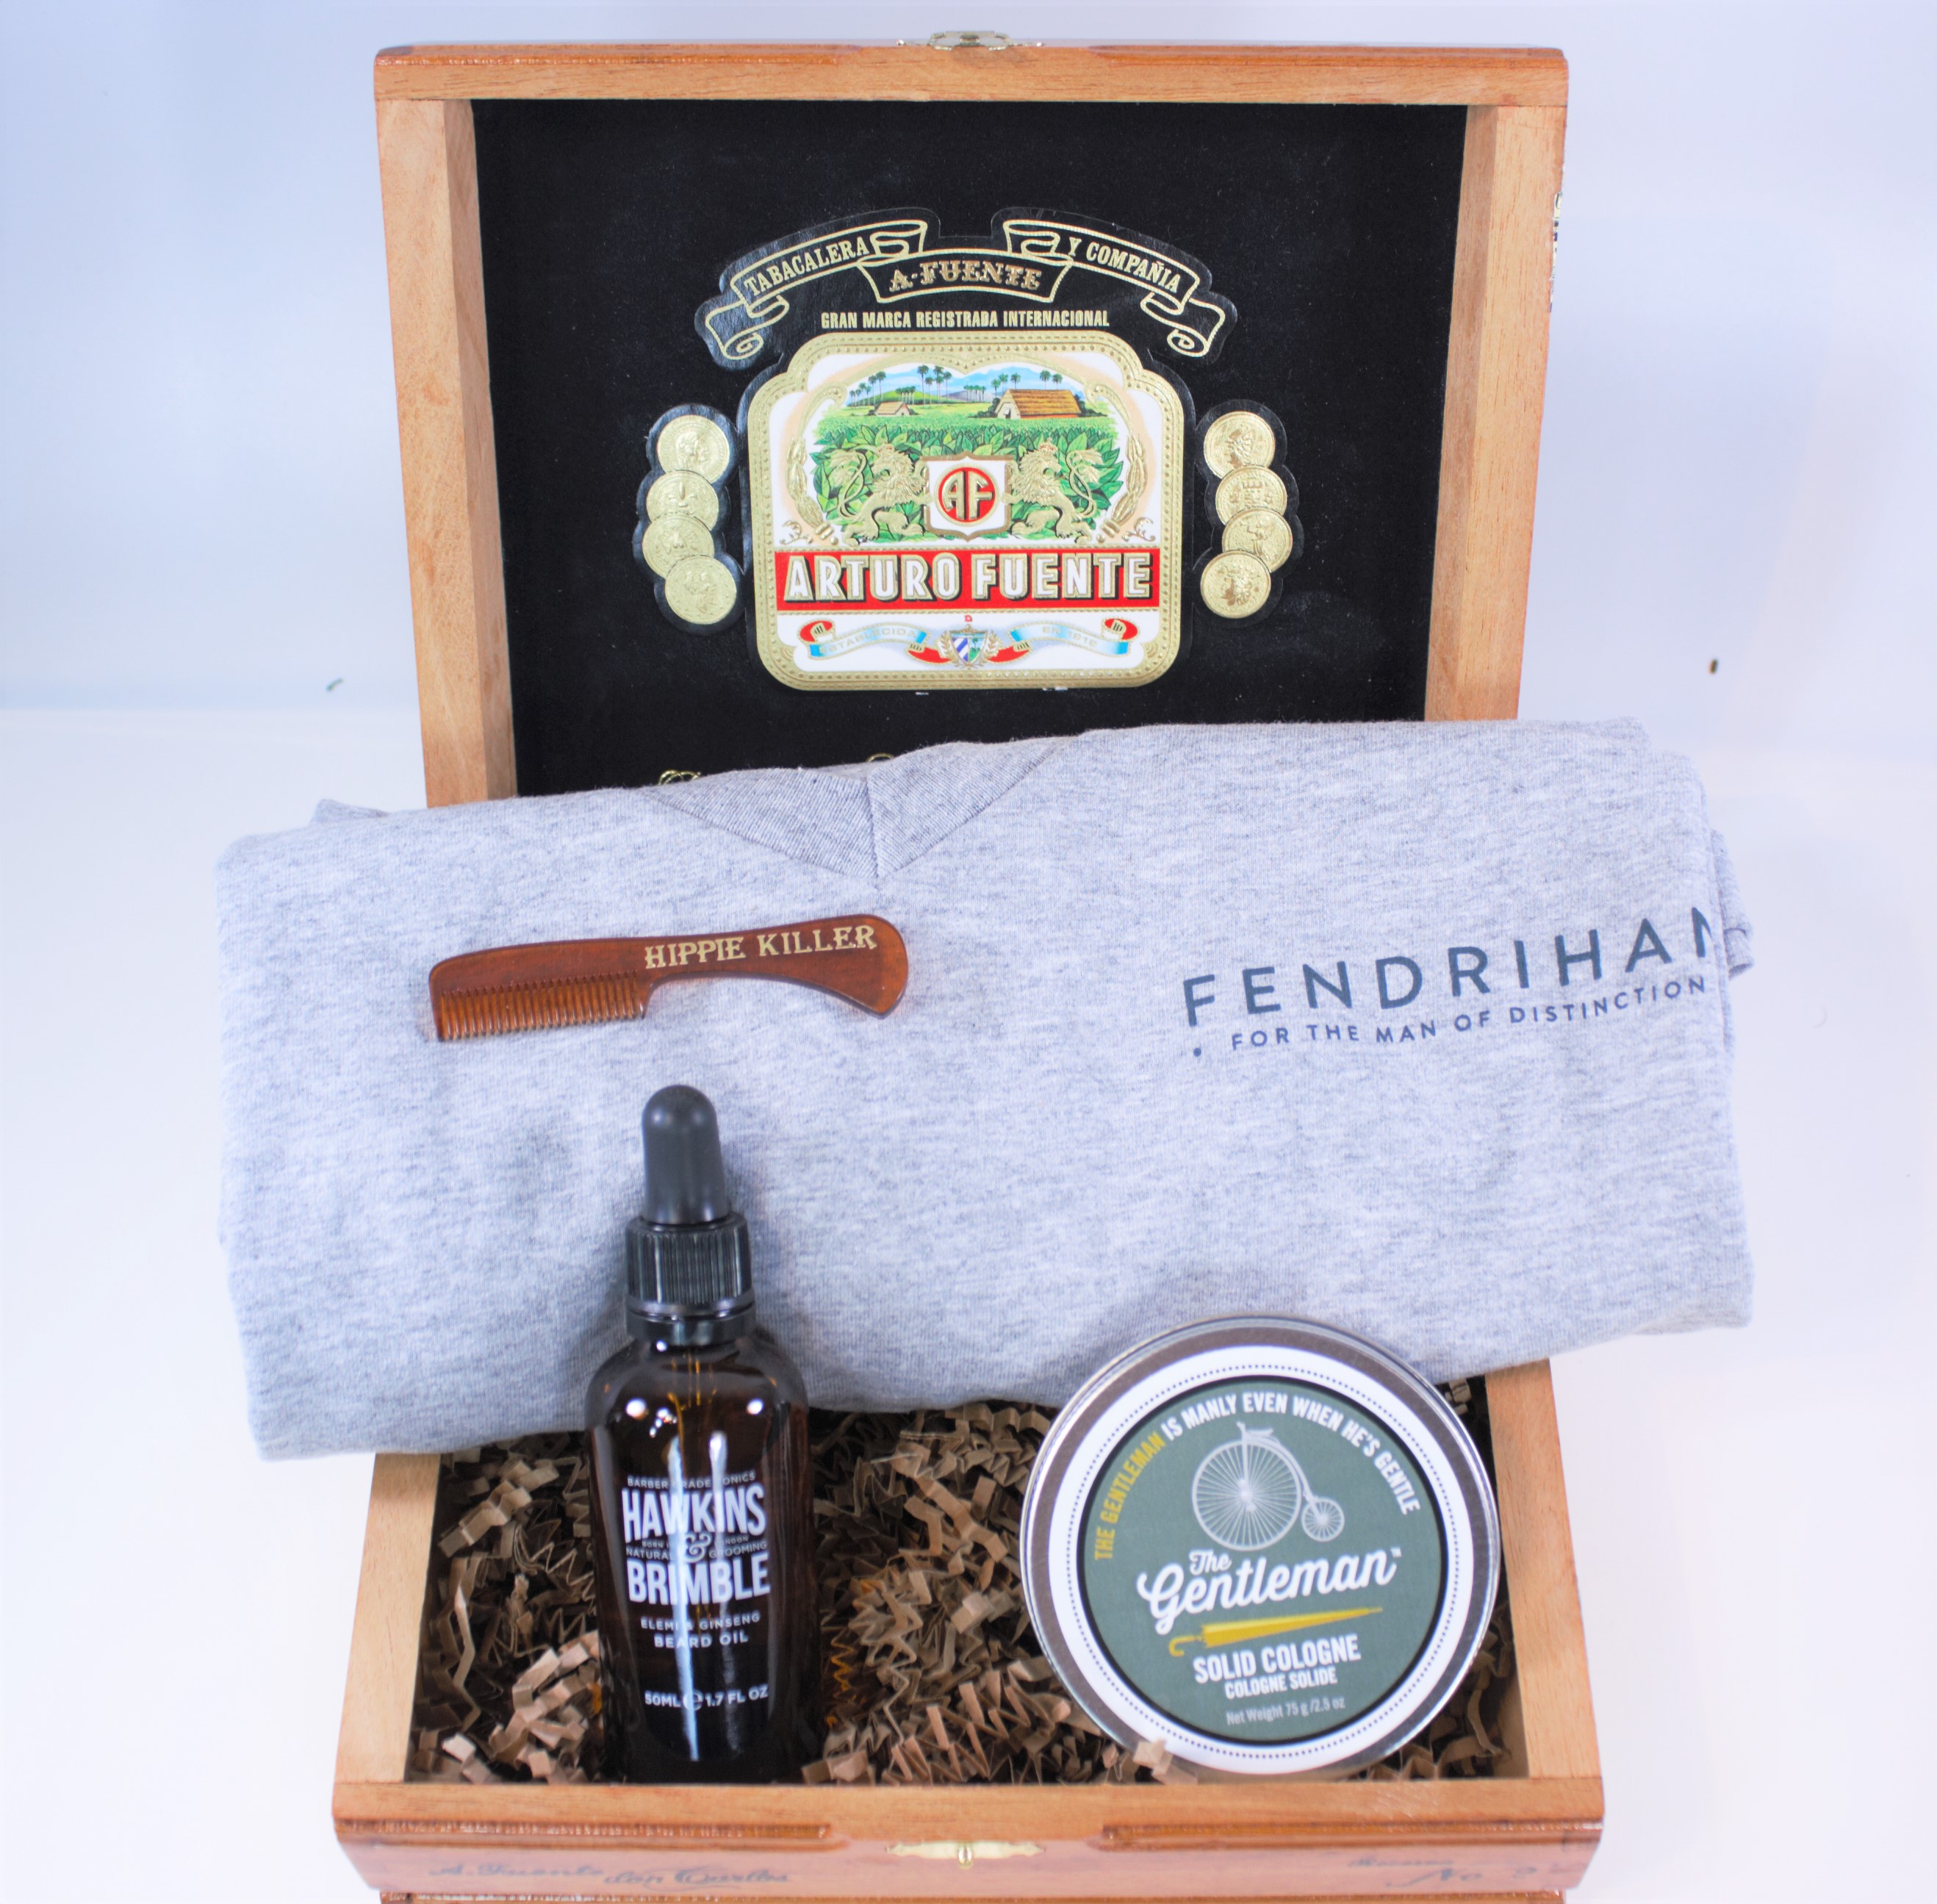 Weekly Giveaway #3 – Win a Cigar Box with Samples